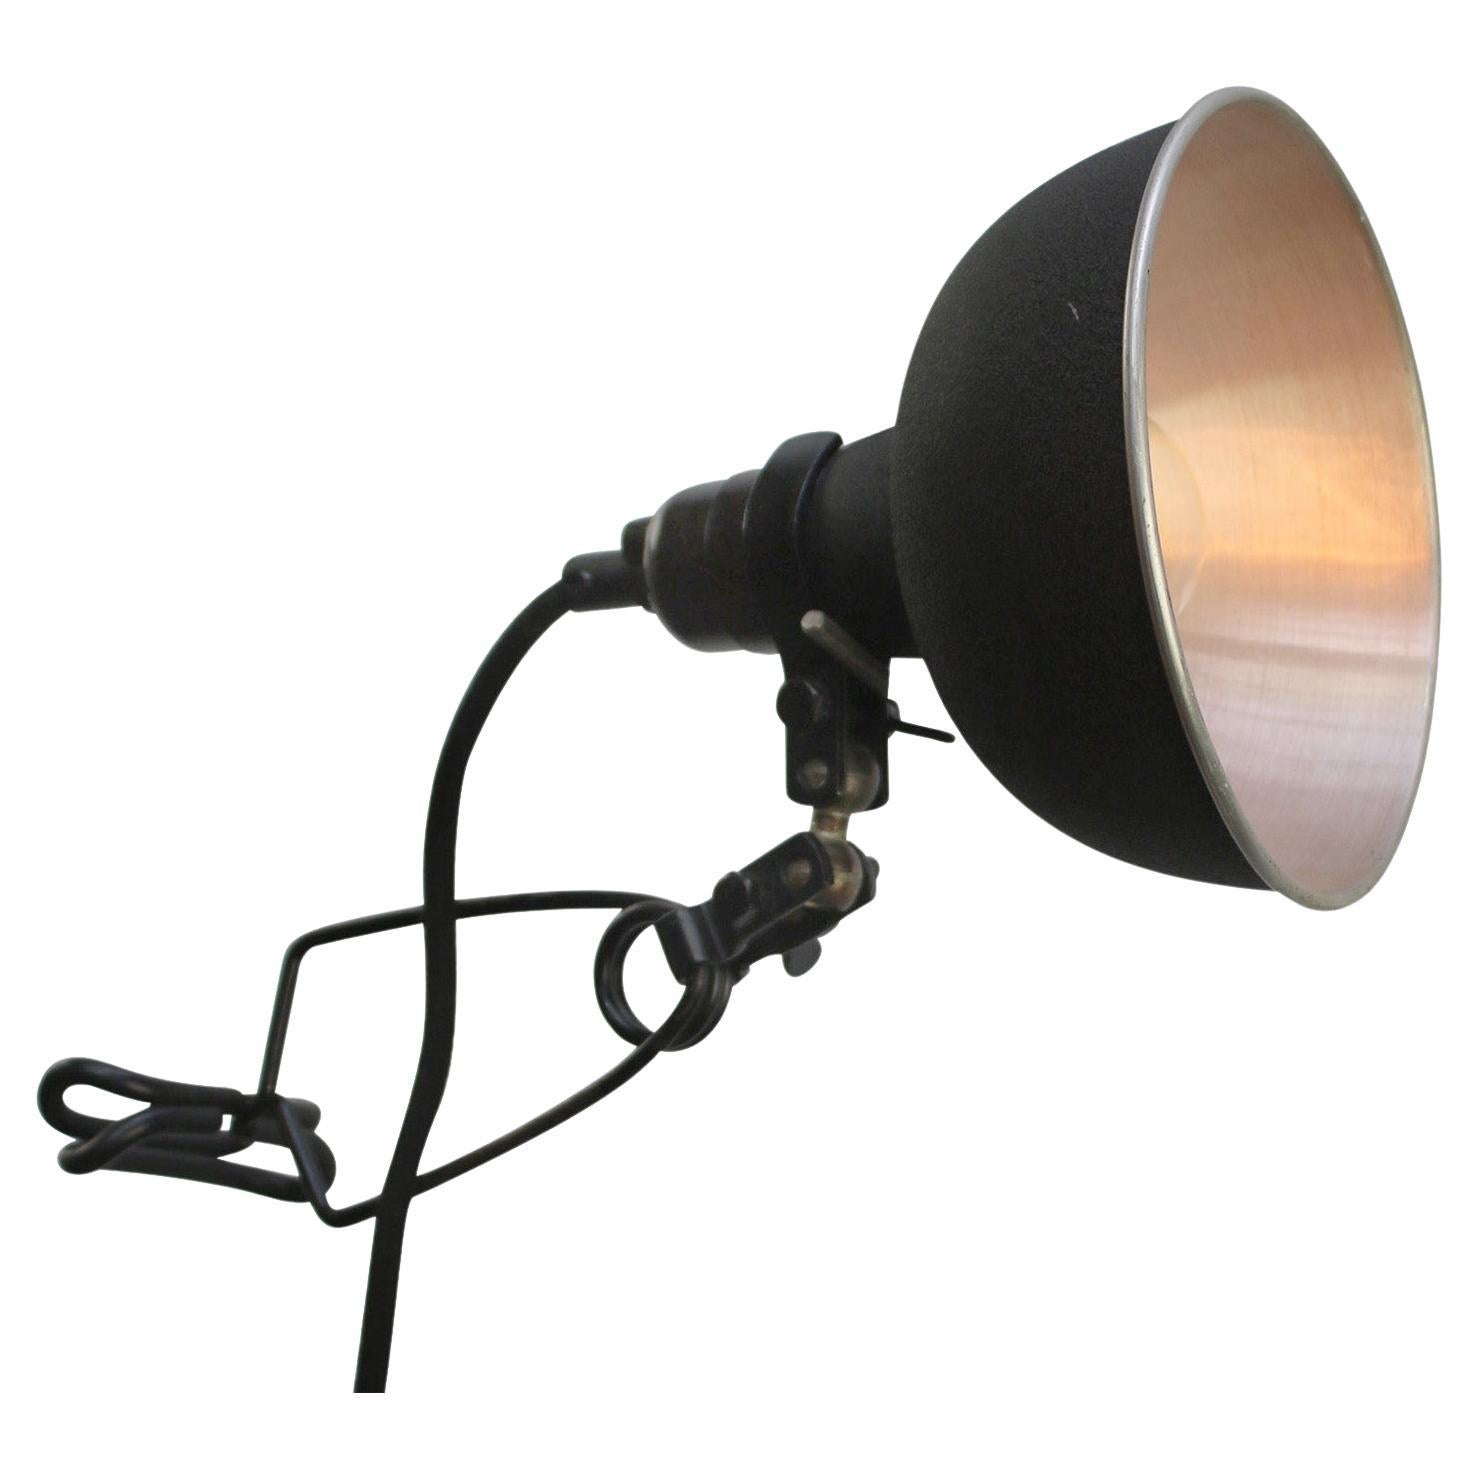 Black Photography, Studio Clamp Wall Lamp by KAP For Sale